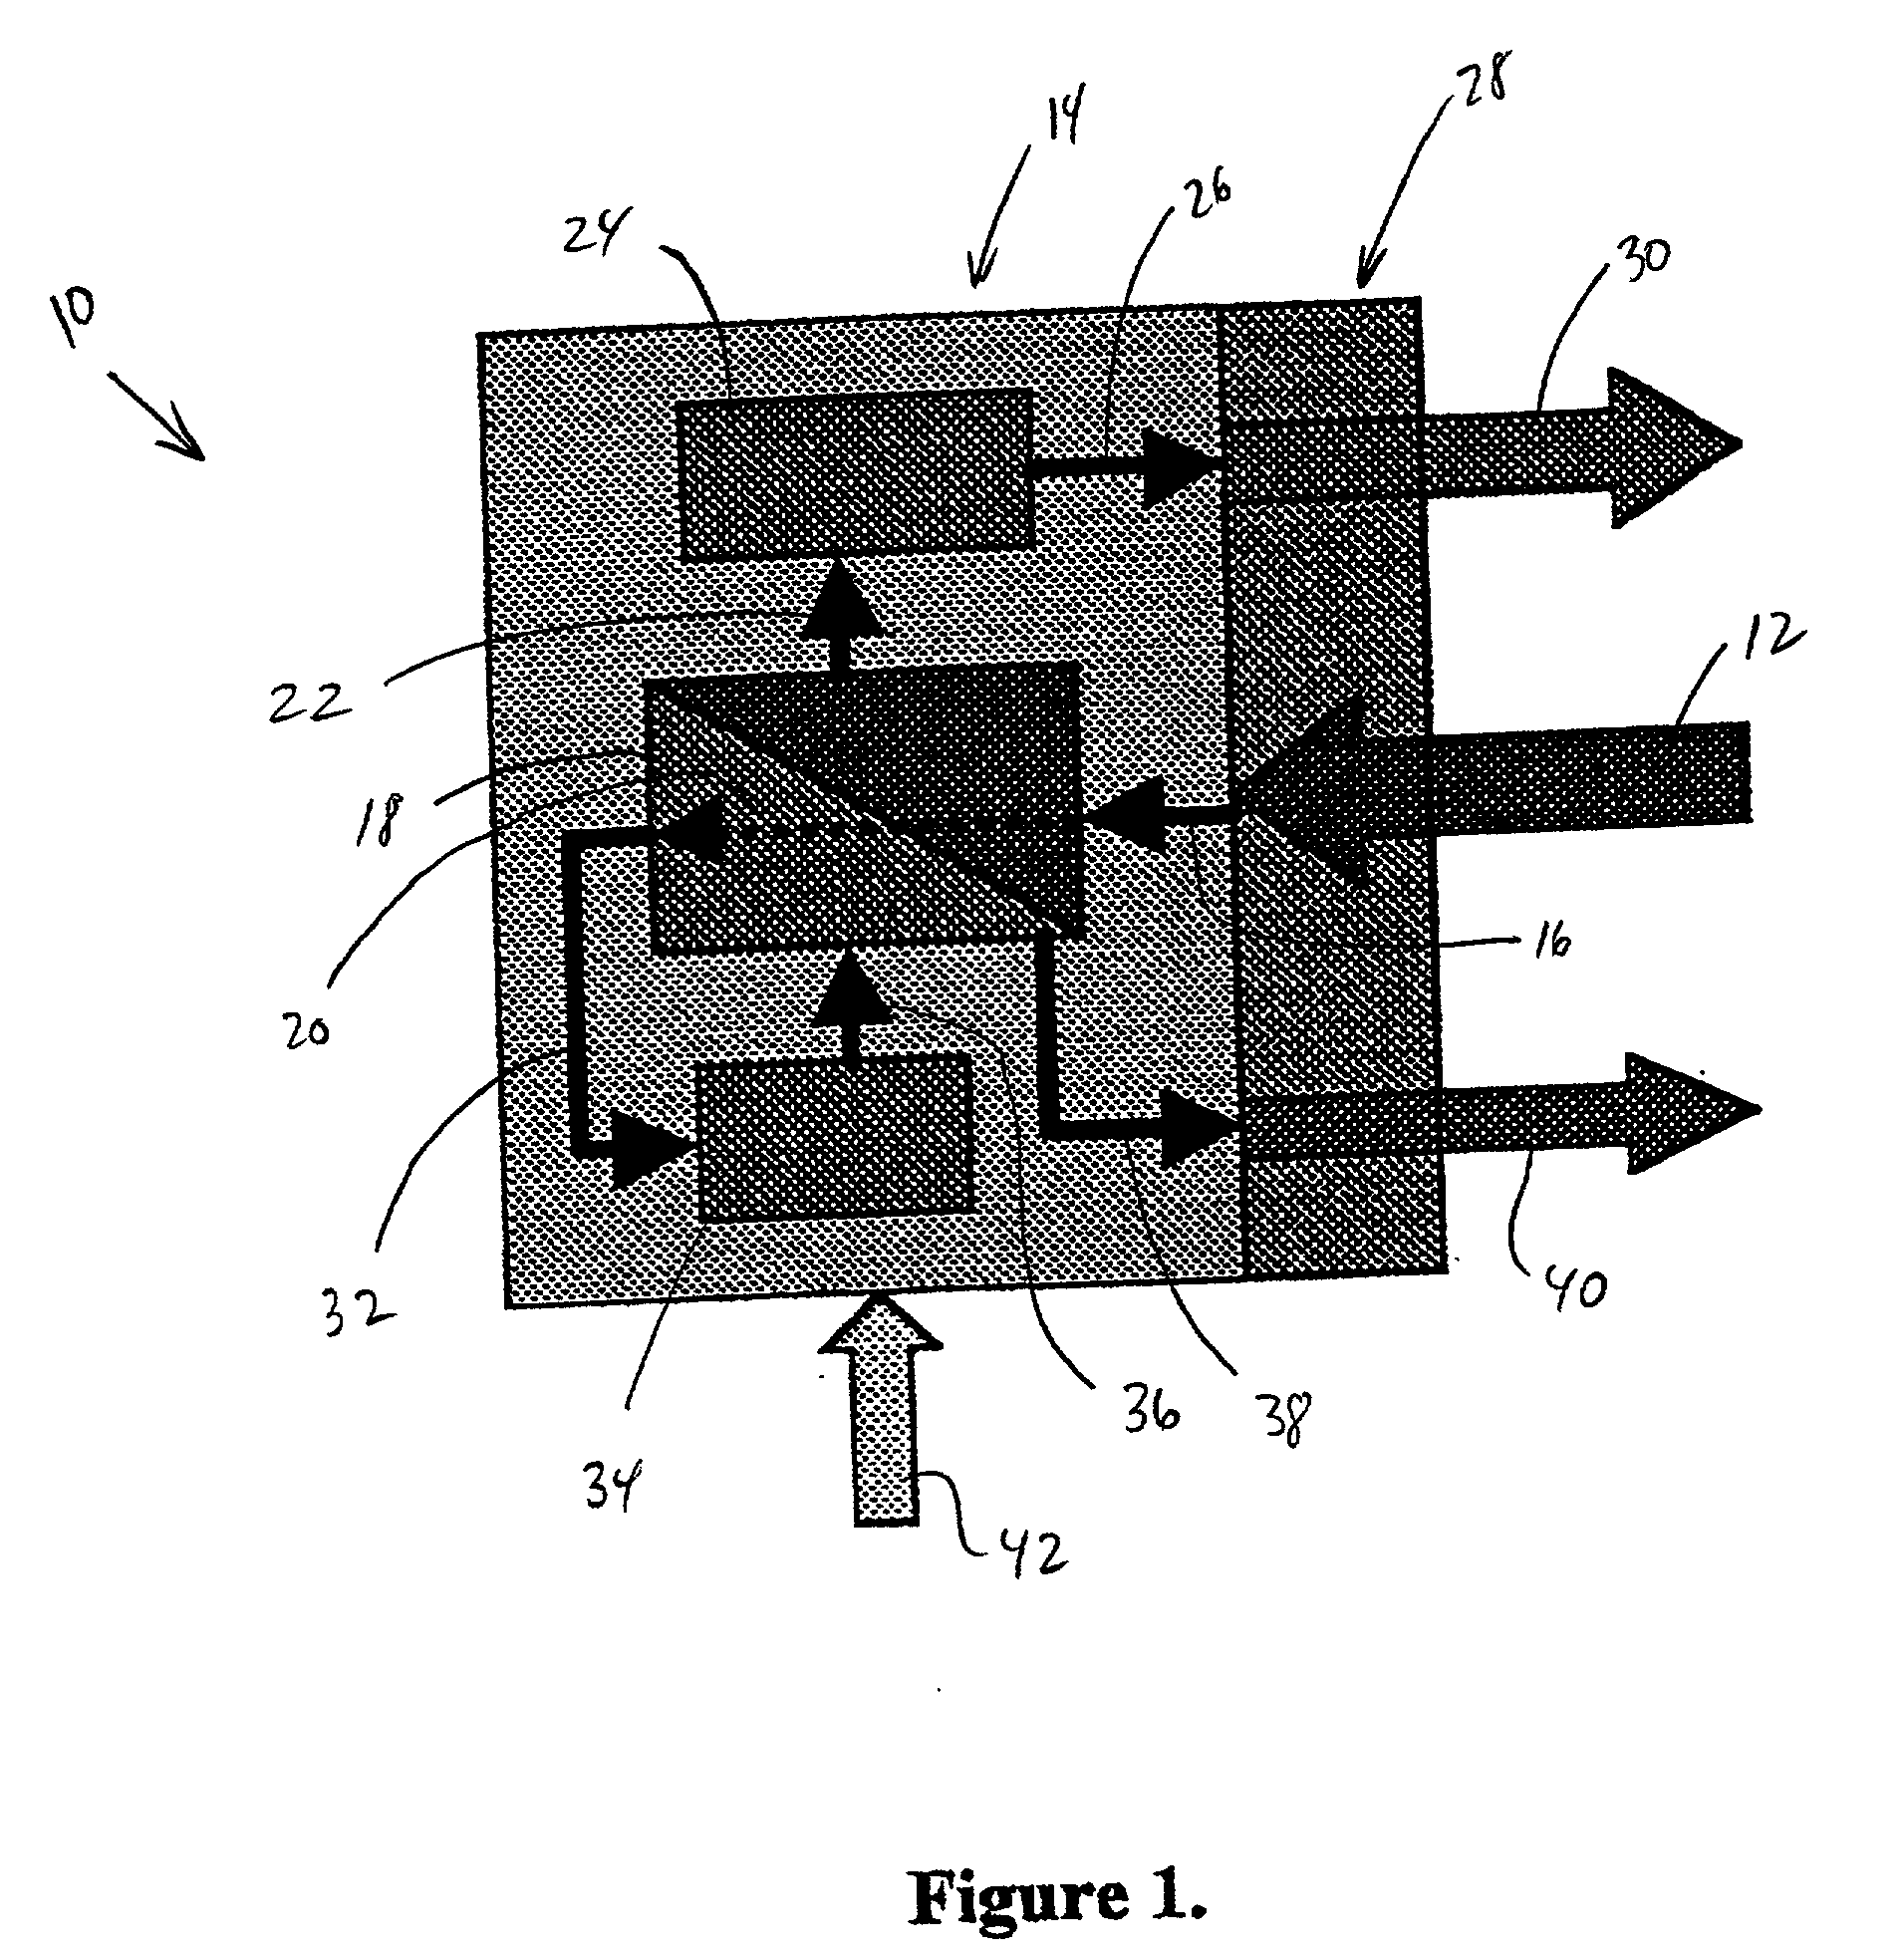 Process for producing sterile water for injection from potable water